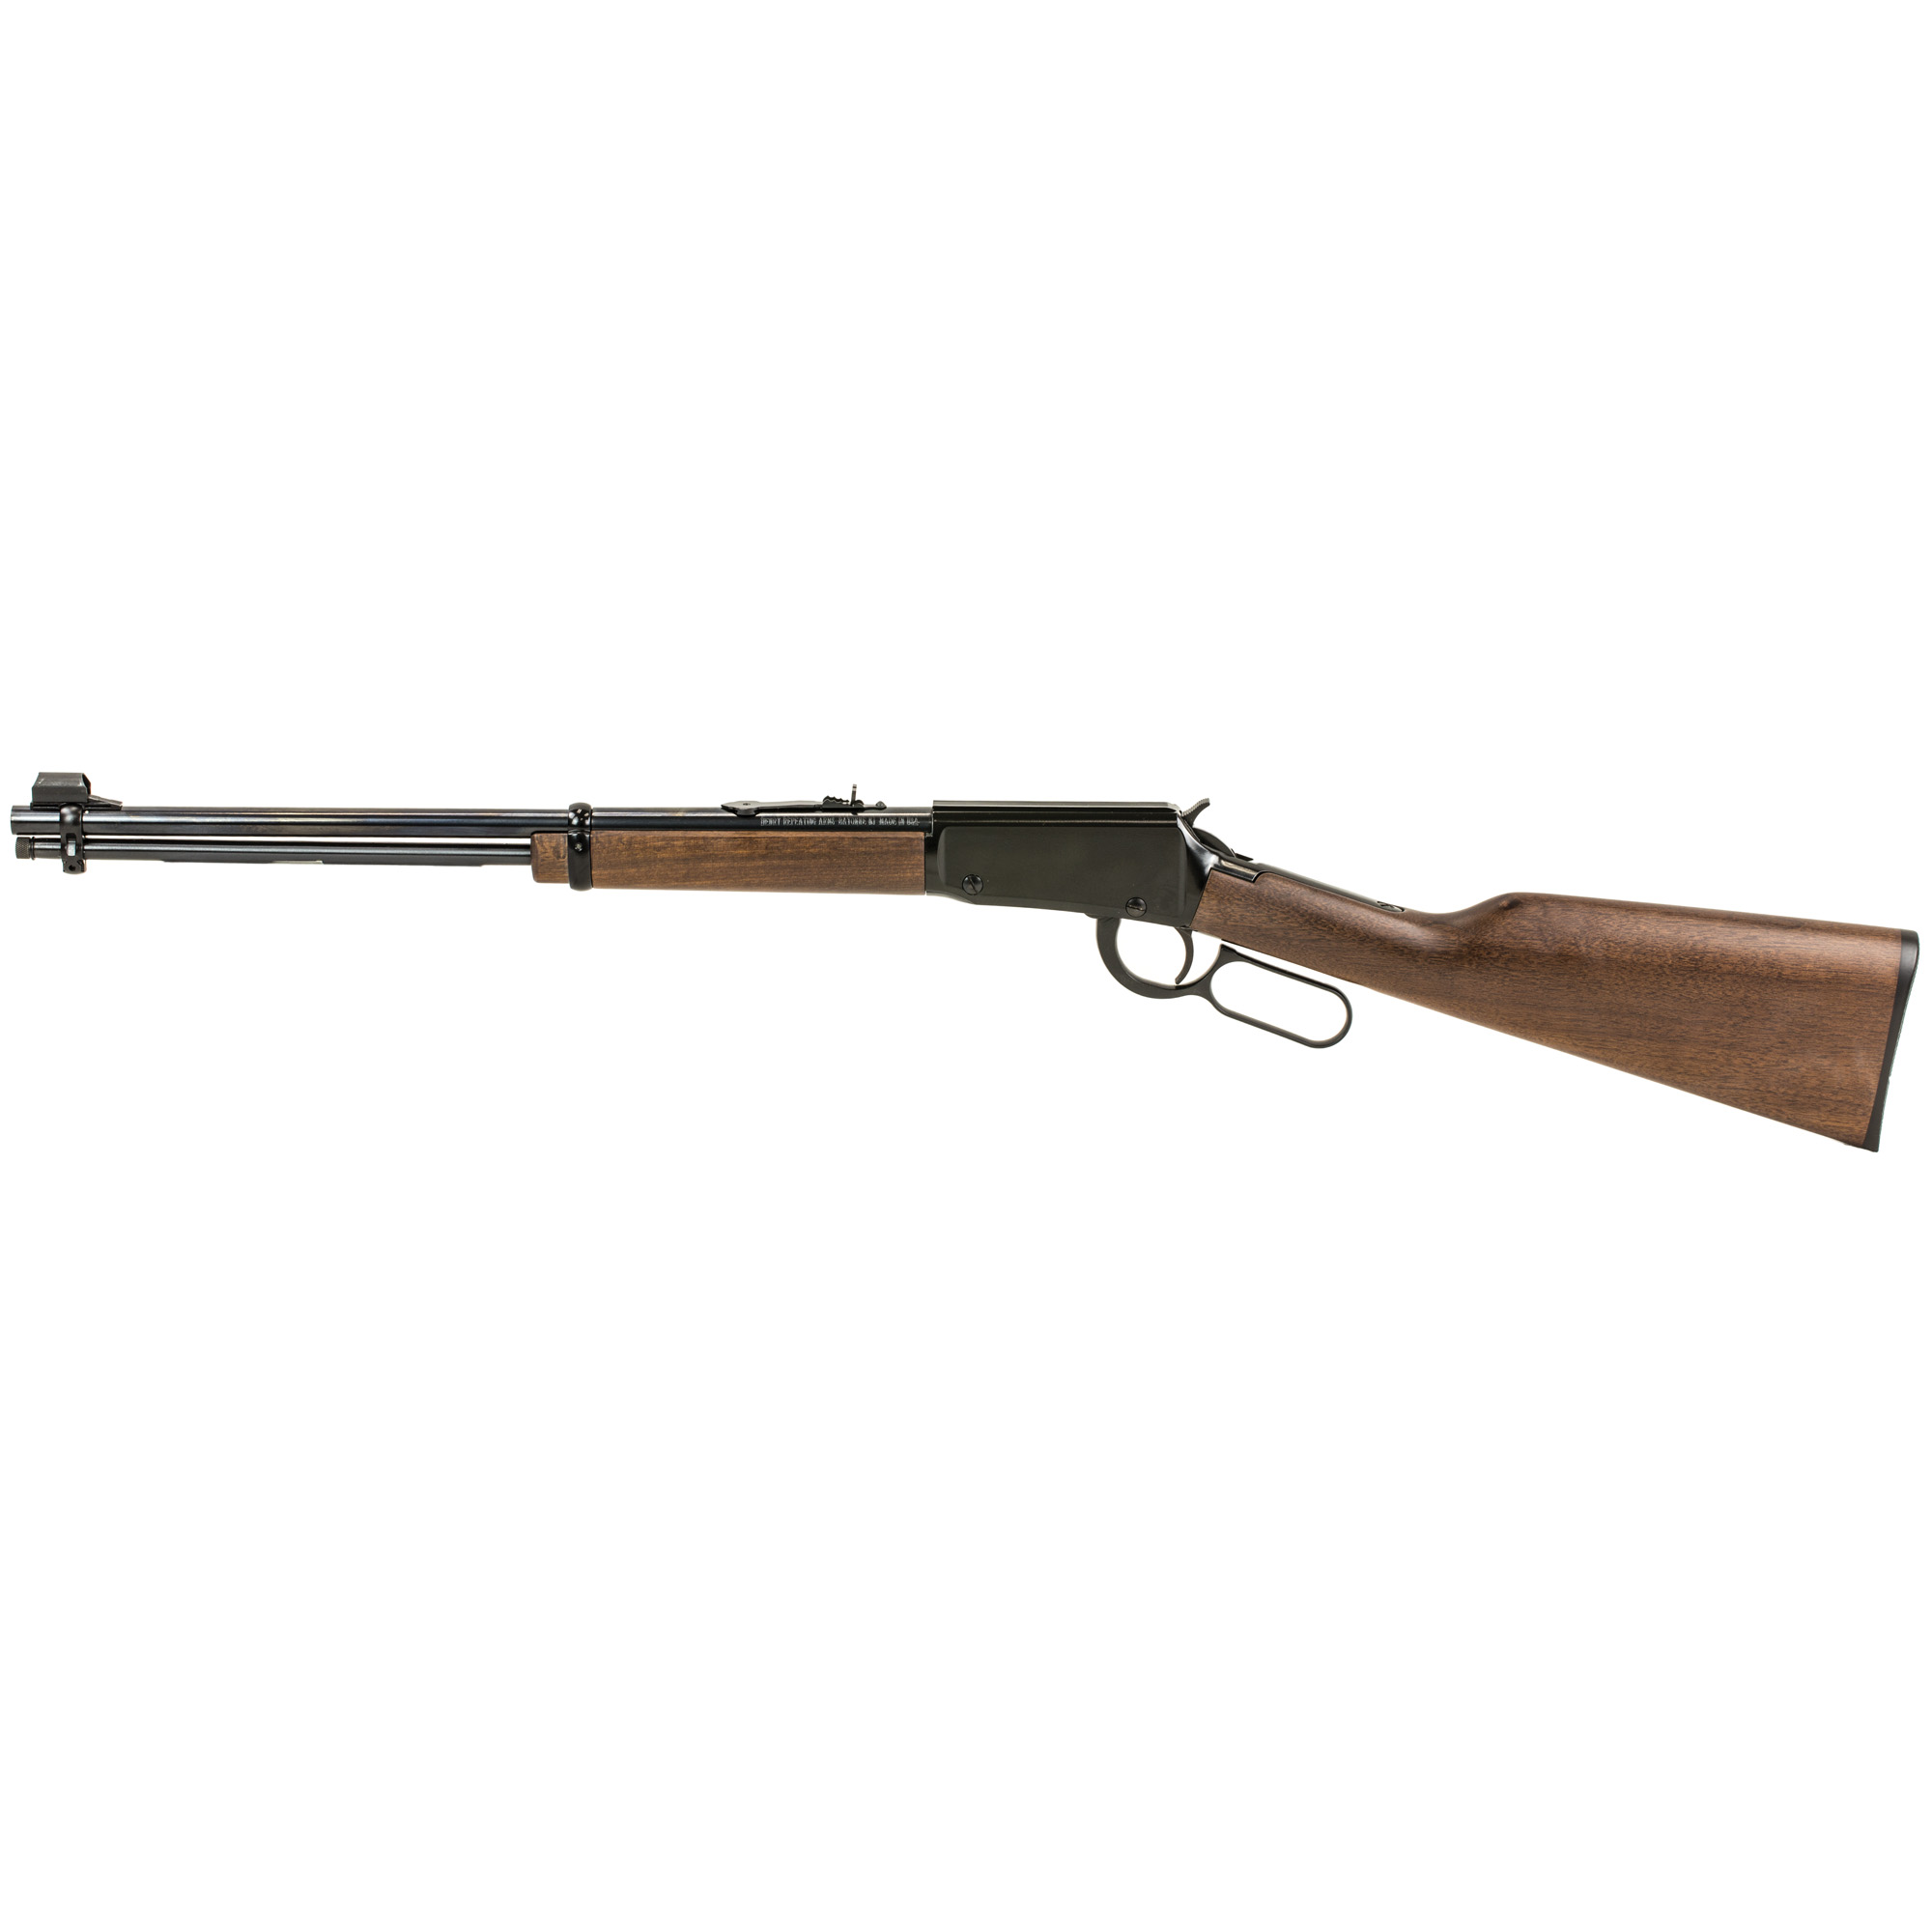 HENRY CLASSIC LEVER 22LR 18.5